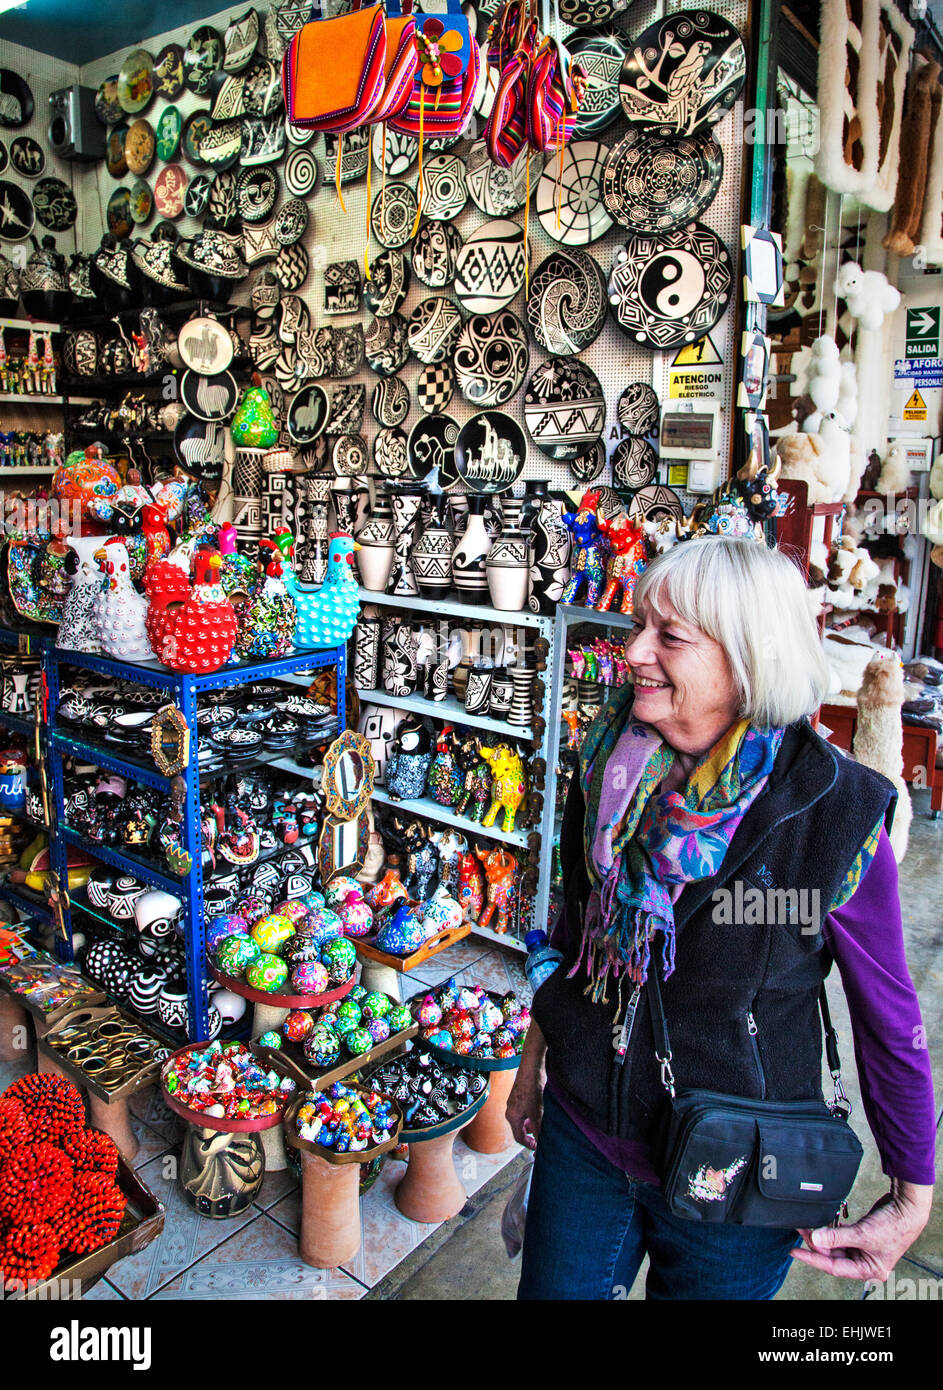 The mercado in the center of the Miraflores District in Lima caters to tourists from all over the world. Stock Photo